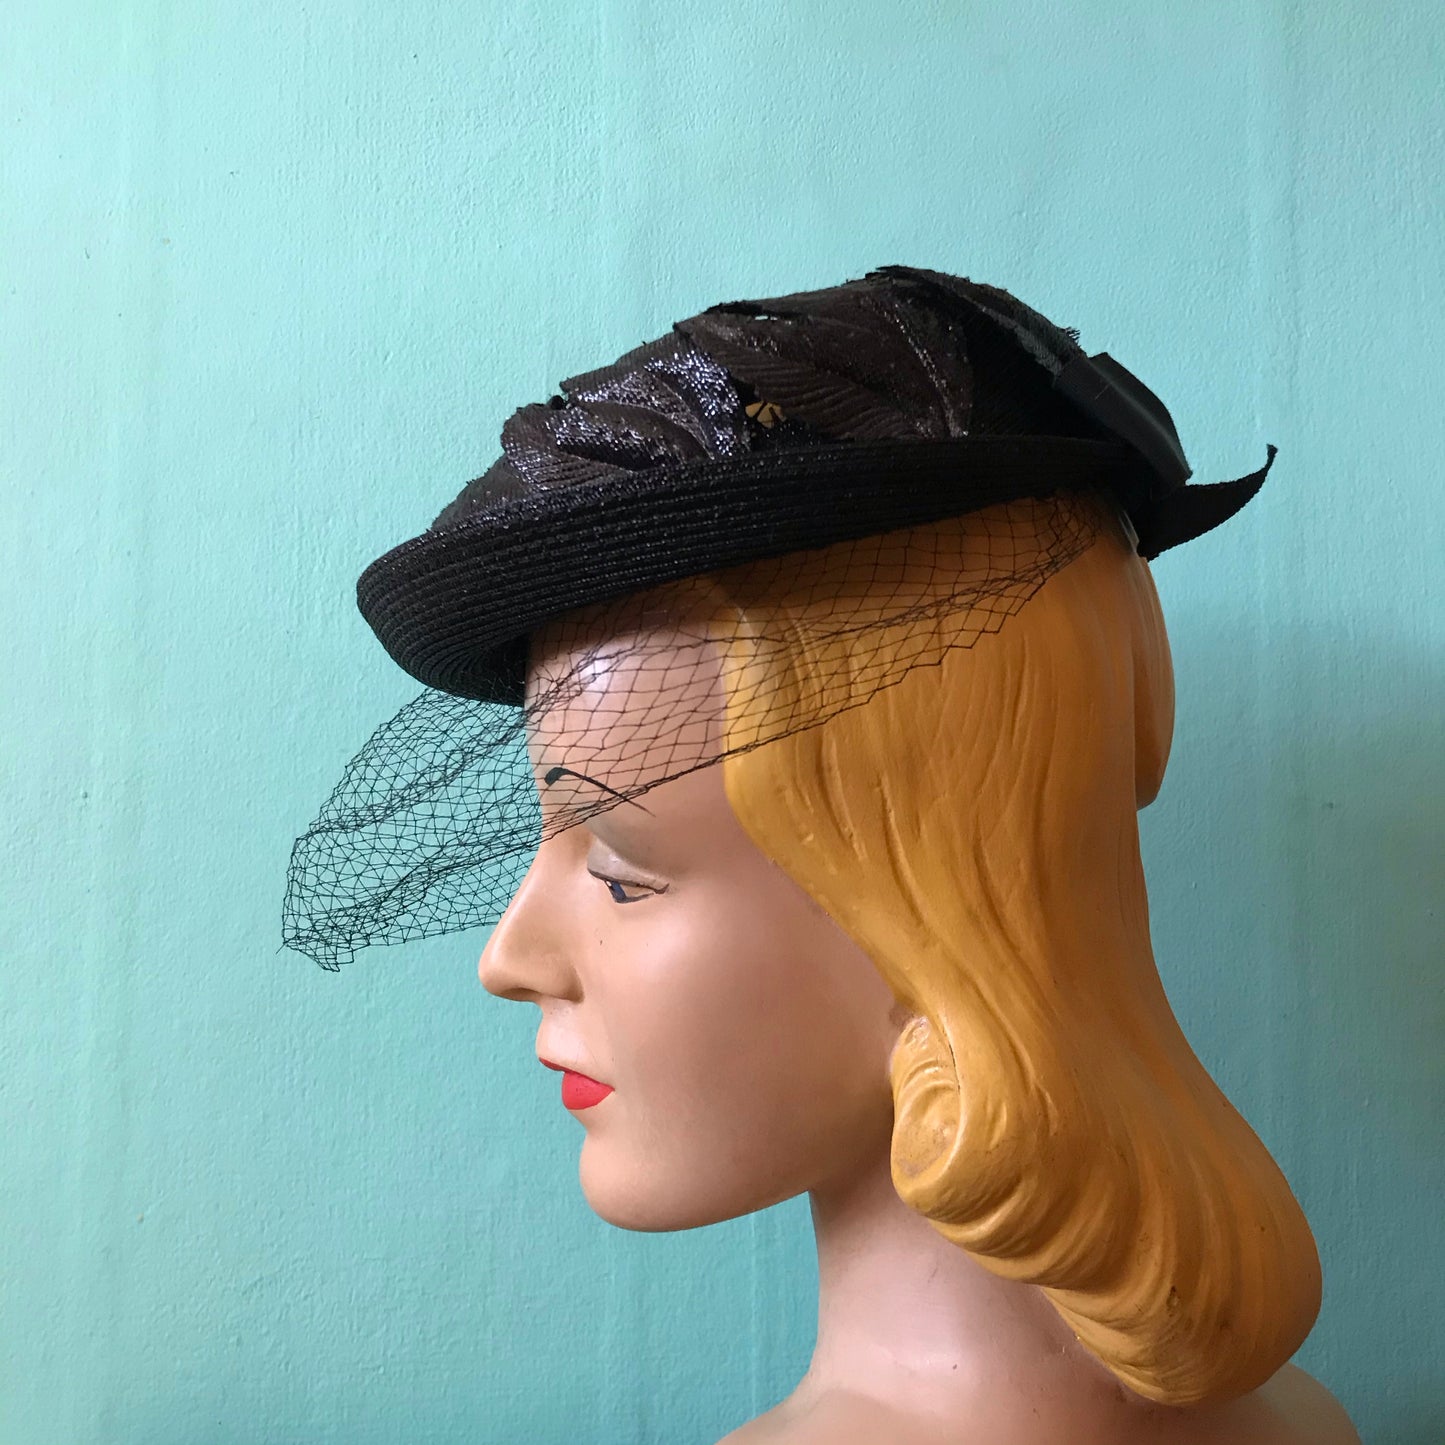 Black Narrow Brimmed Boater Style Hat with Flame Shaped Leaves on Open Top circa 1960s